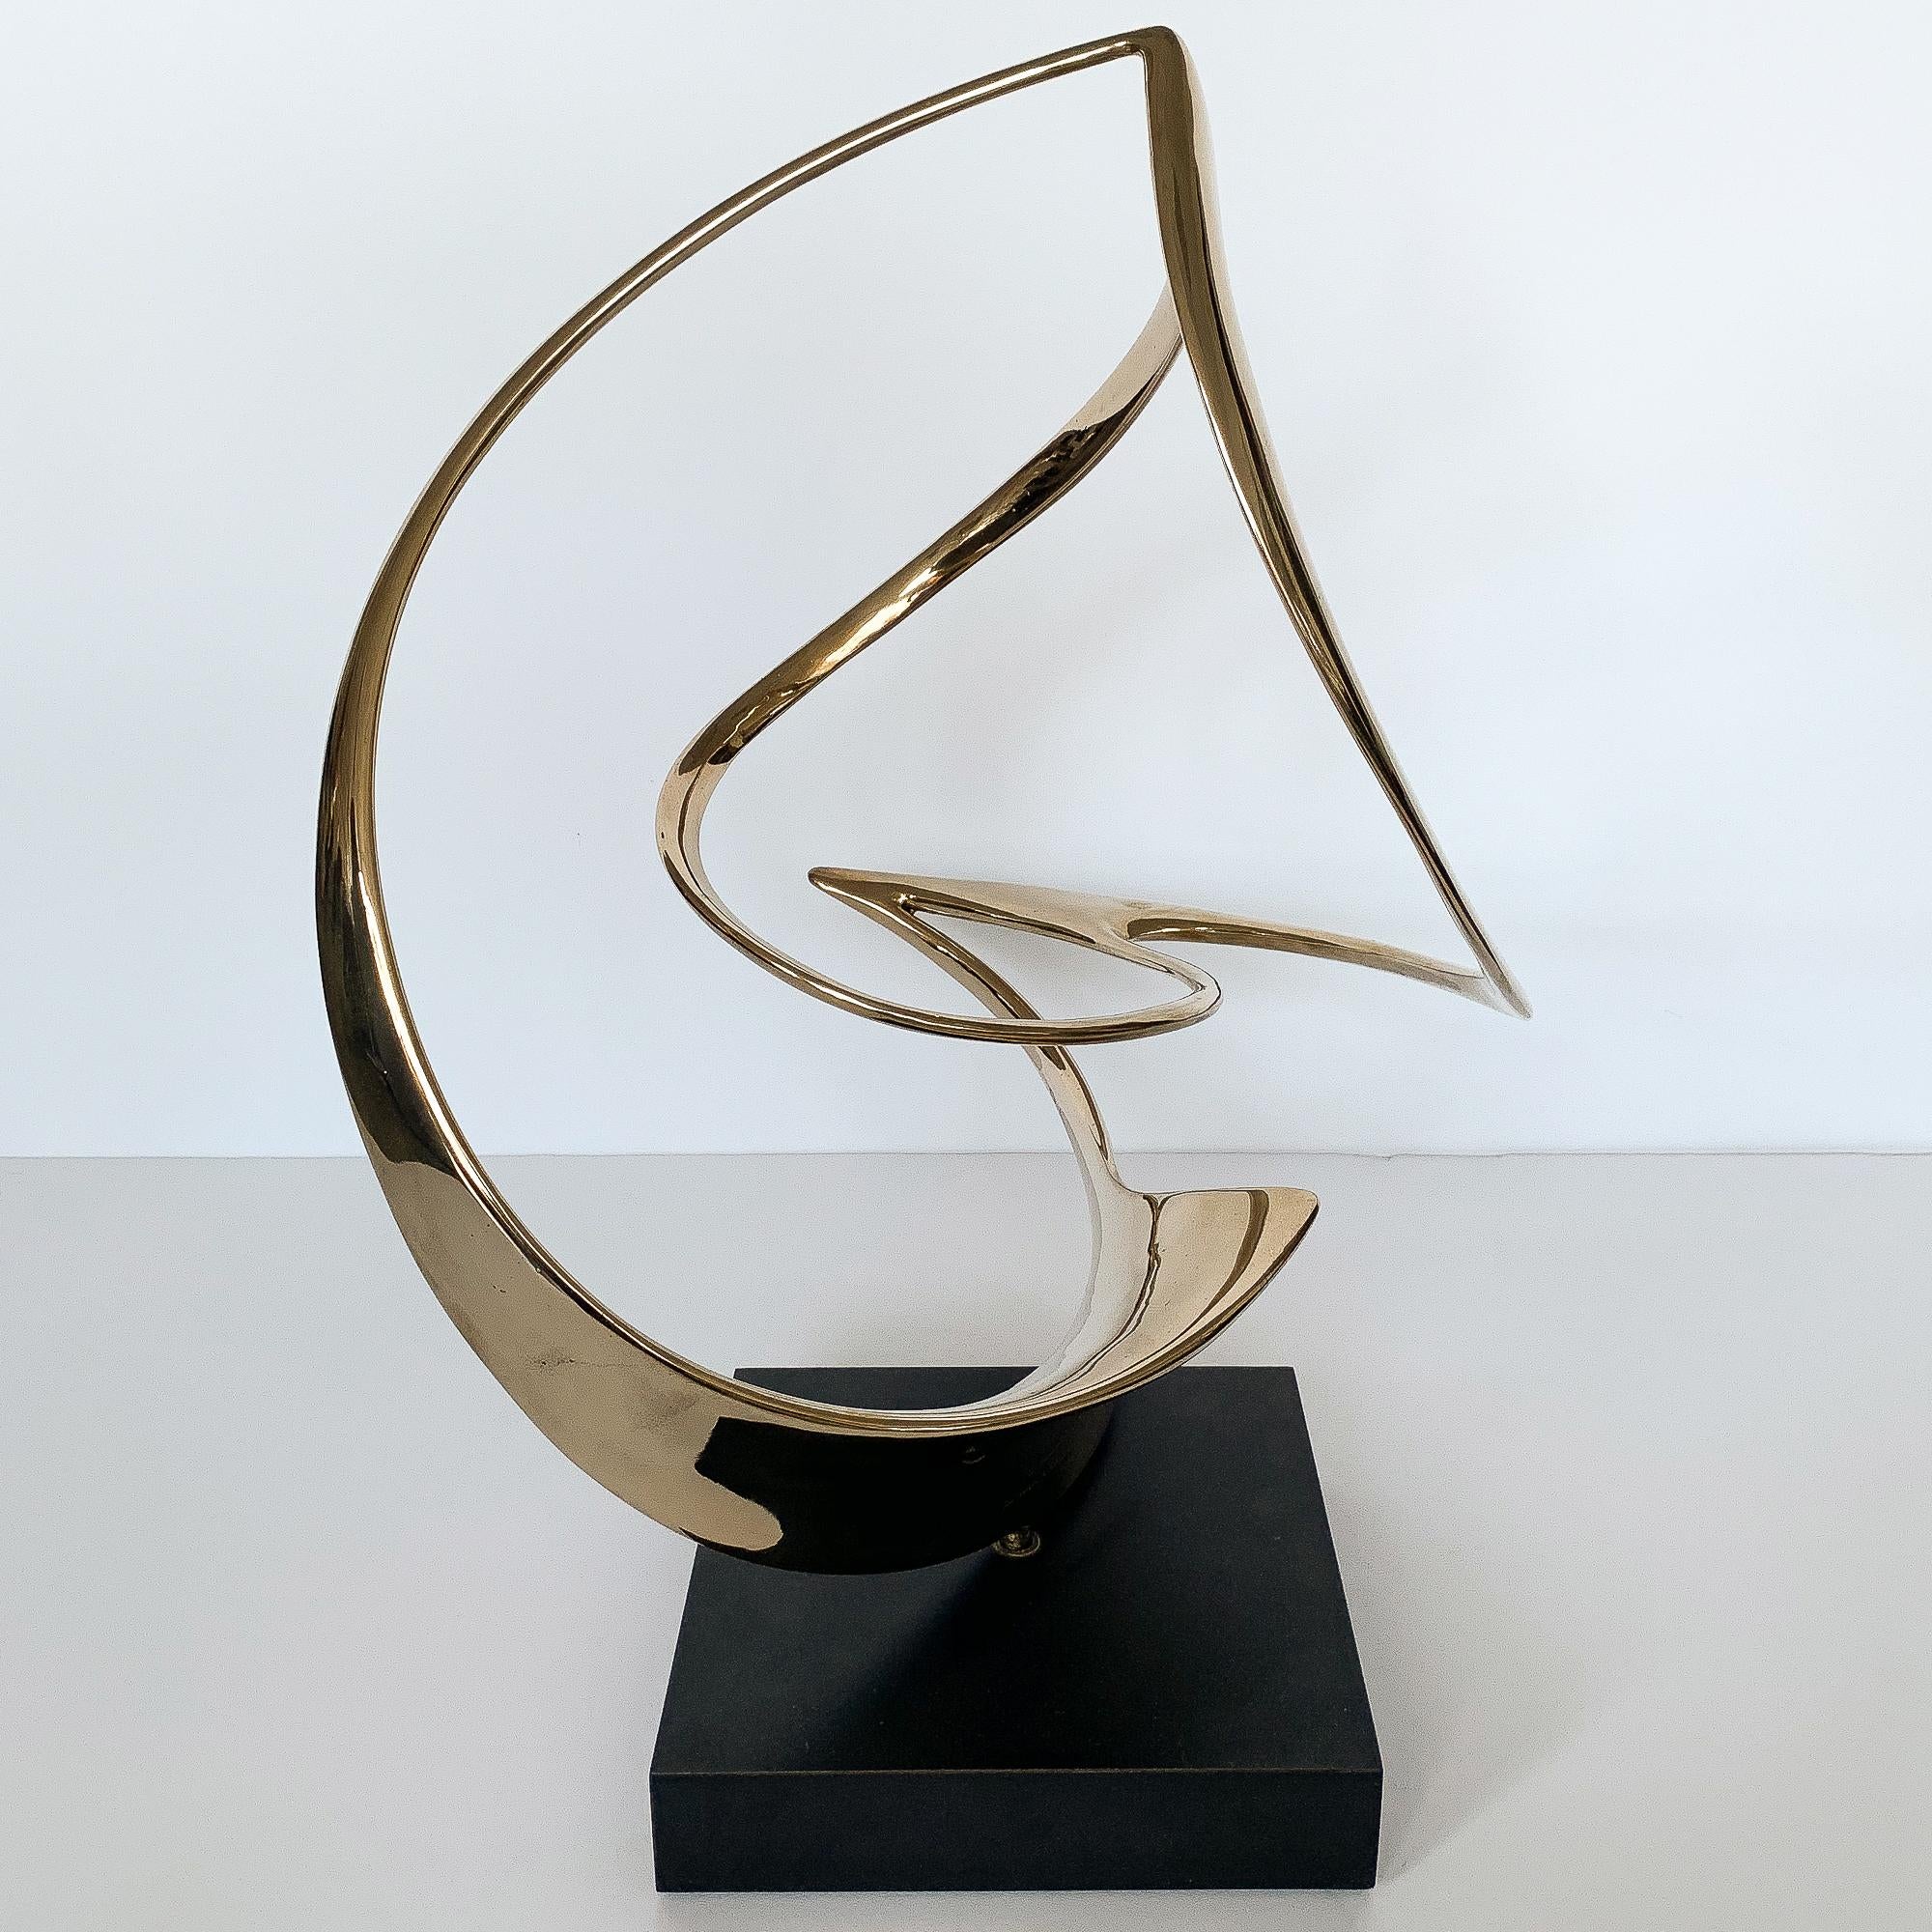 American Abstract Solid Bronze Ribbon Sculpture by Pearson and Robbins